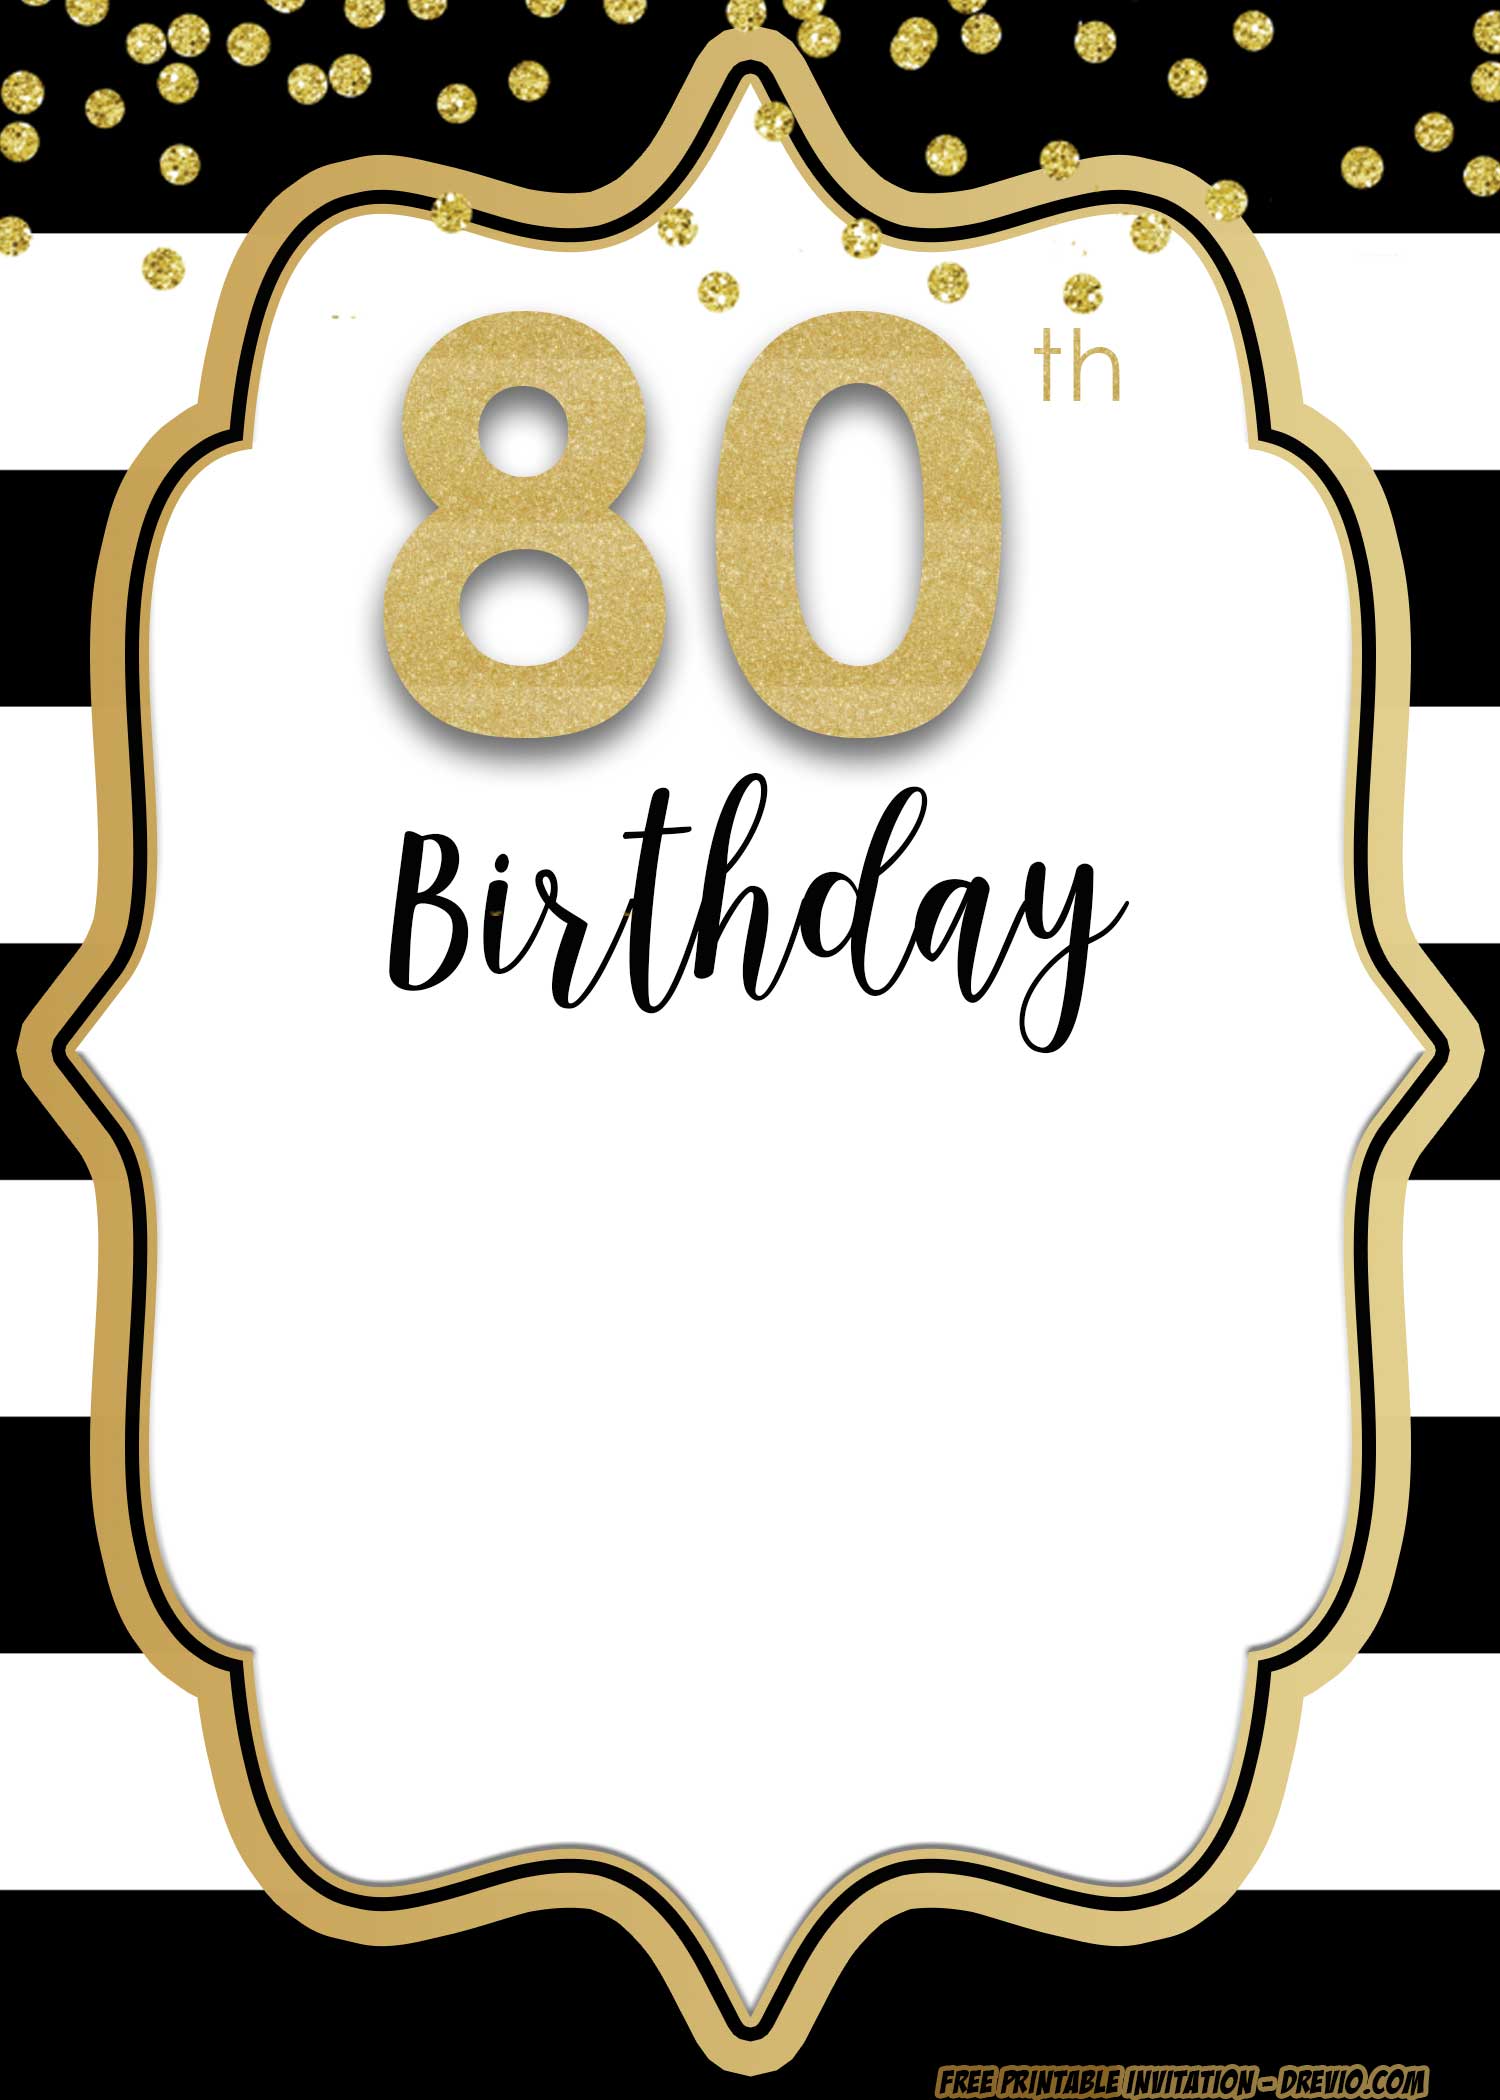 FREE 80th Invitation Templates Unique And Rare Download Hundreds FREE PRINTABLE Birthday